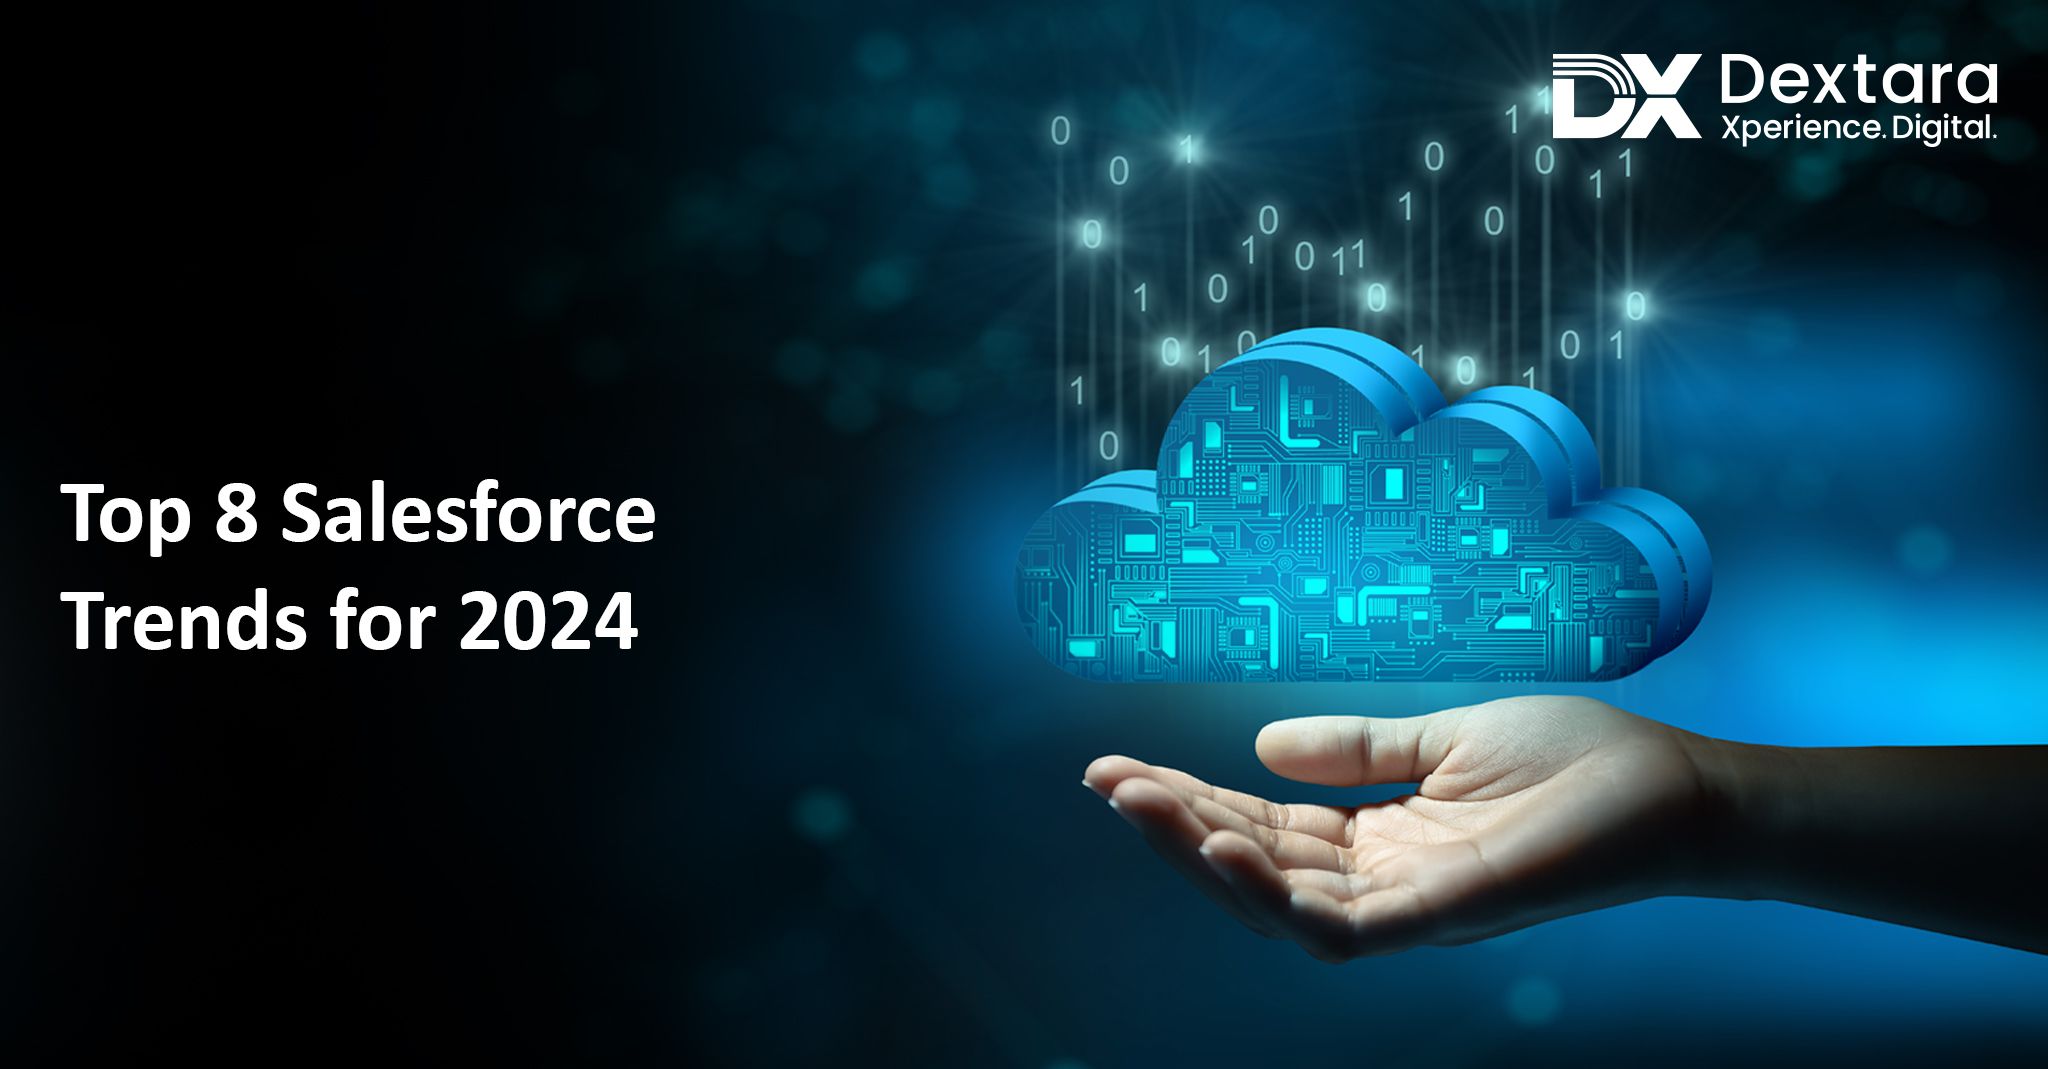 Top 8 Salesforce Trends for 2024